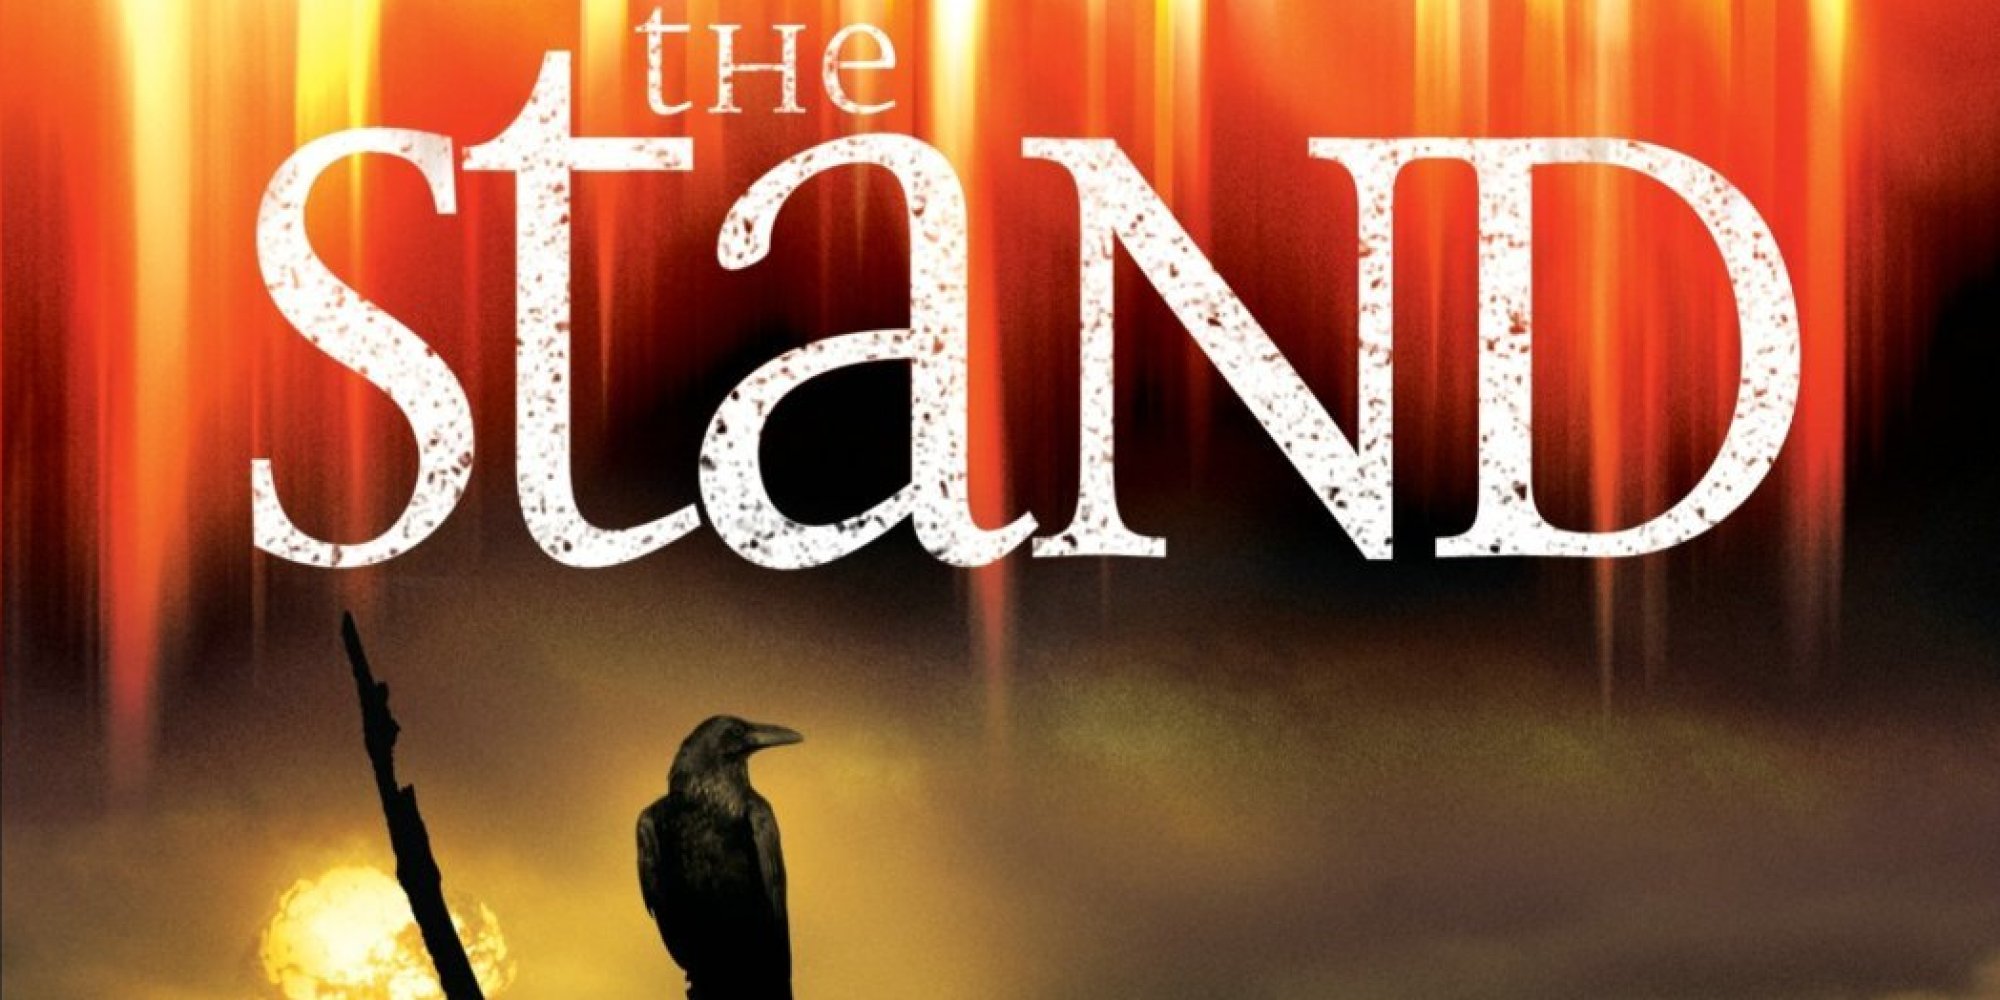 Stephen king's 'the stand' adaptation